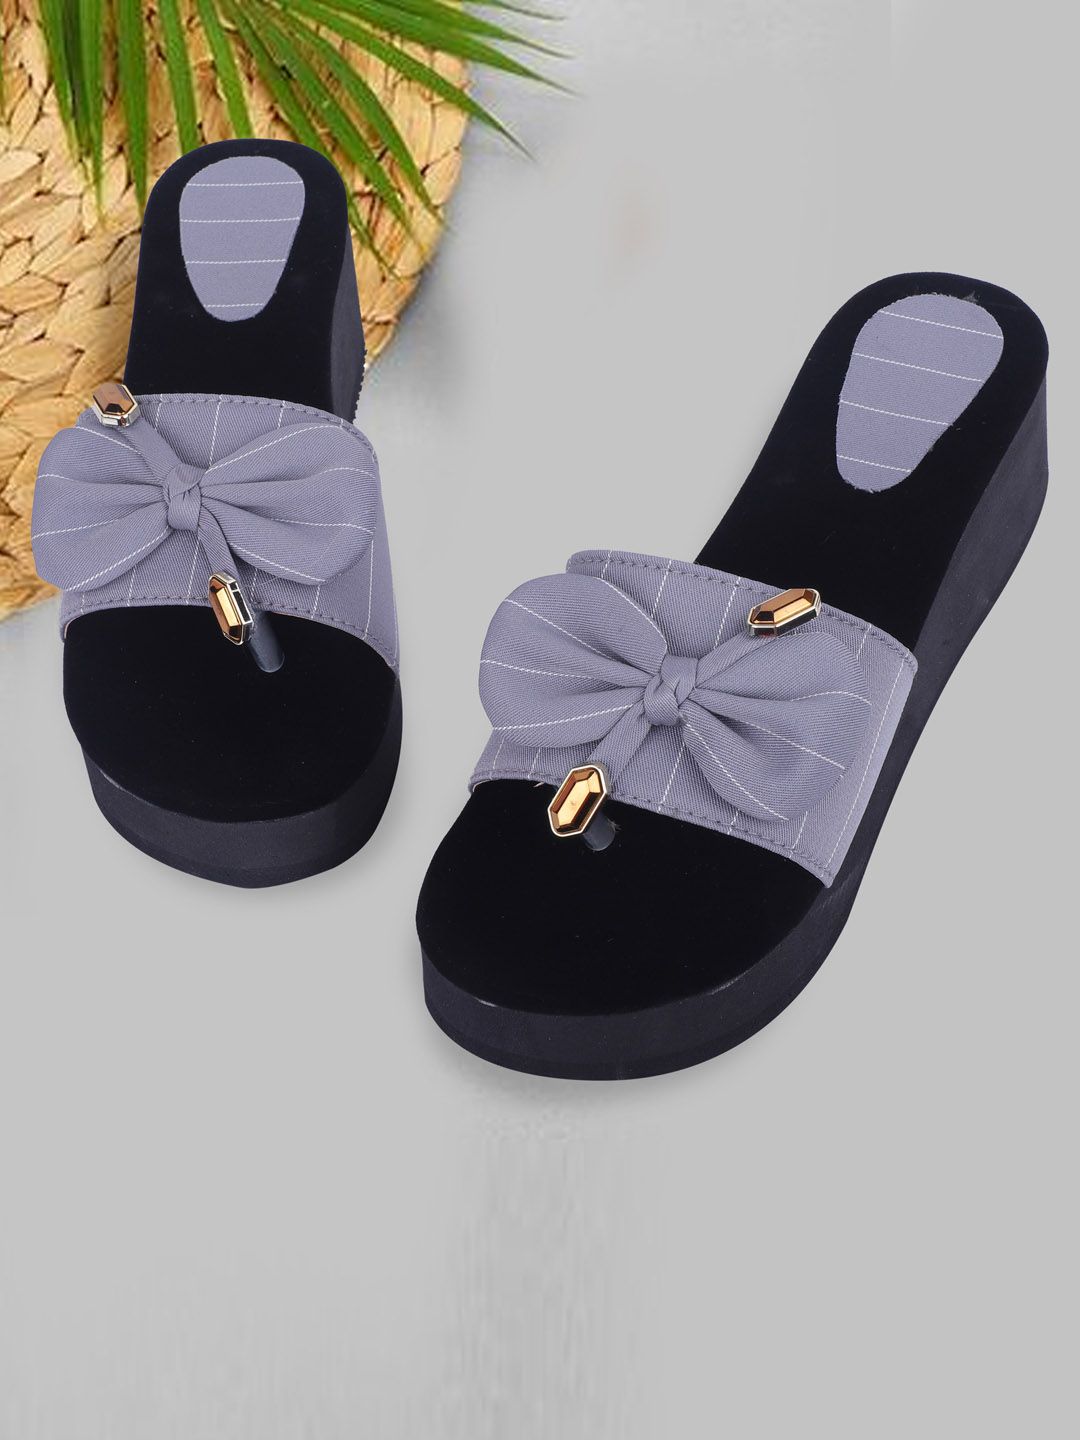 FABBMATE Grey Printed Flatform Sandals with Bows Price in India